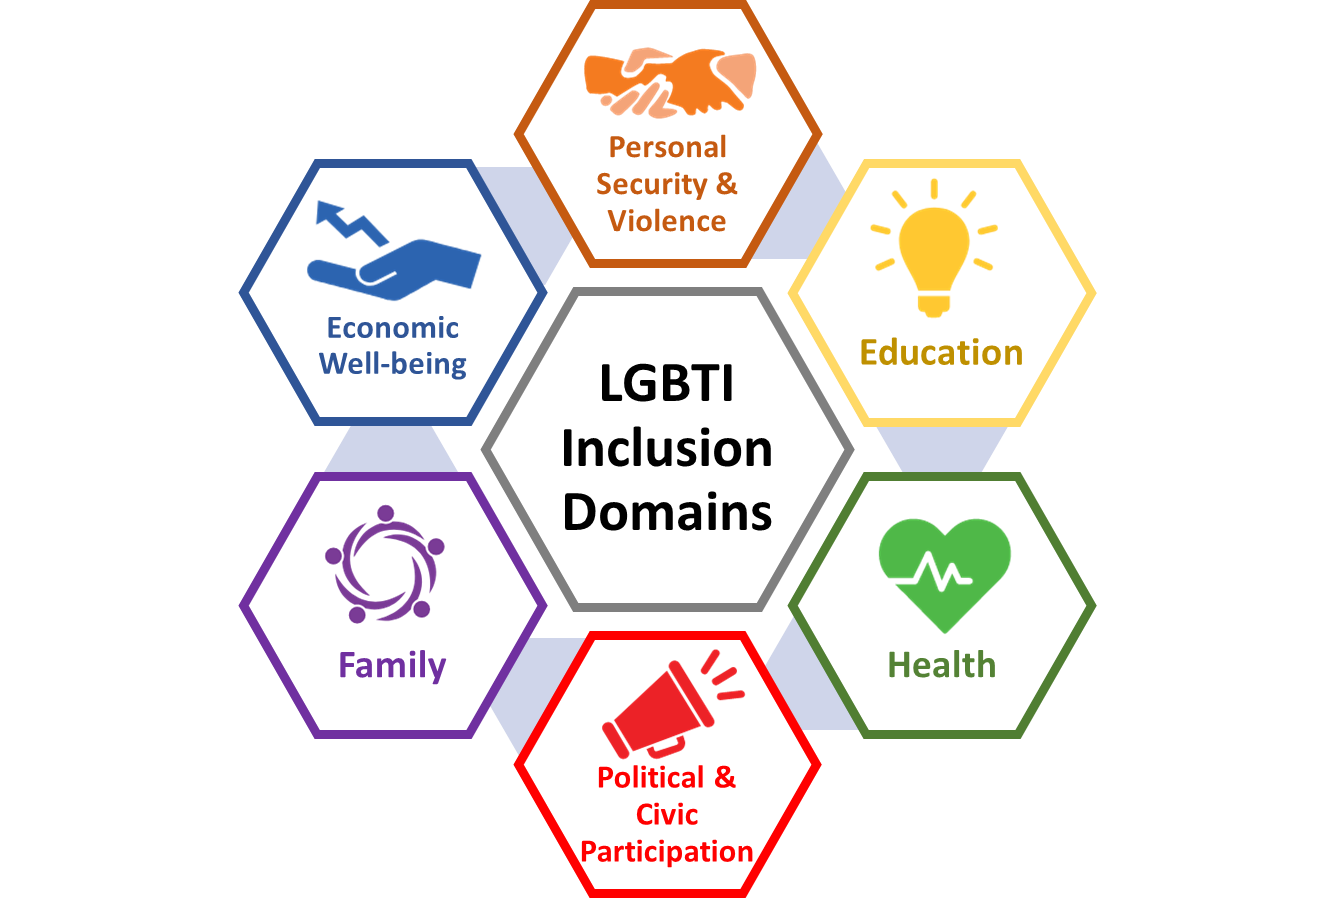 icons illustrating 6 domains for LGBTI Inclusion: Political and civic participation, family, education, economic well-being, health, and personal security and violence